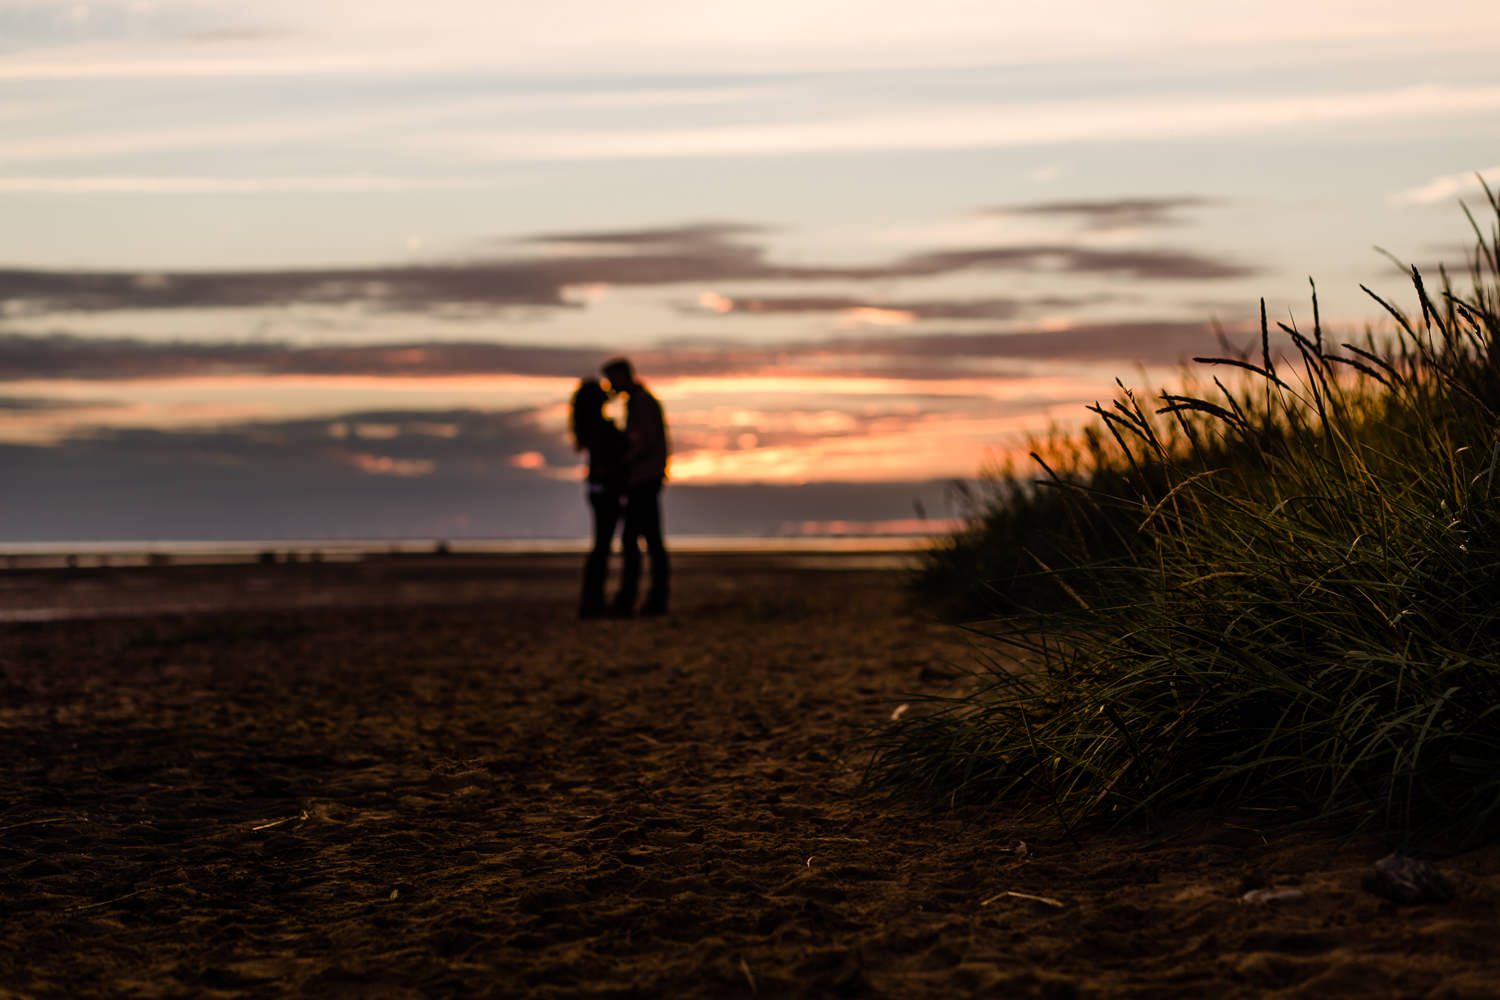 A couple silhouetted against the sunset key on the beach couple shoot